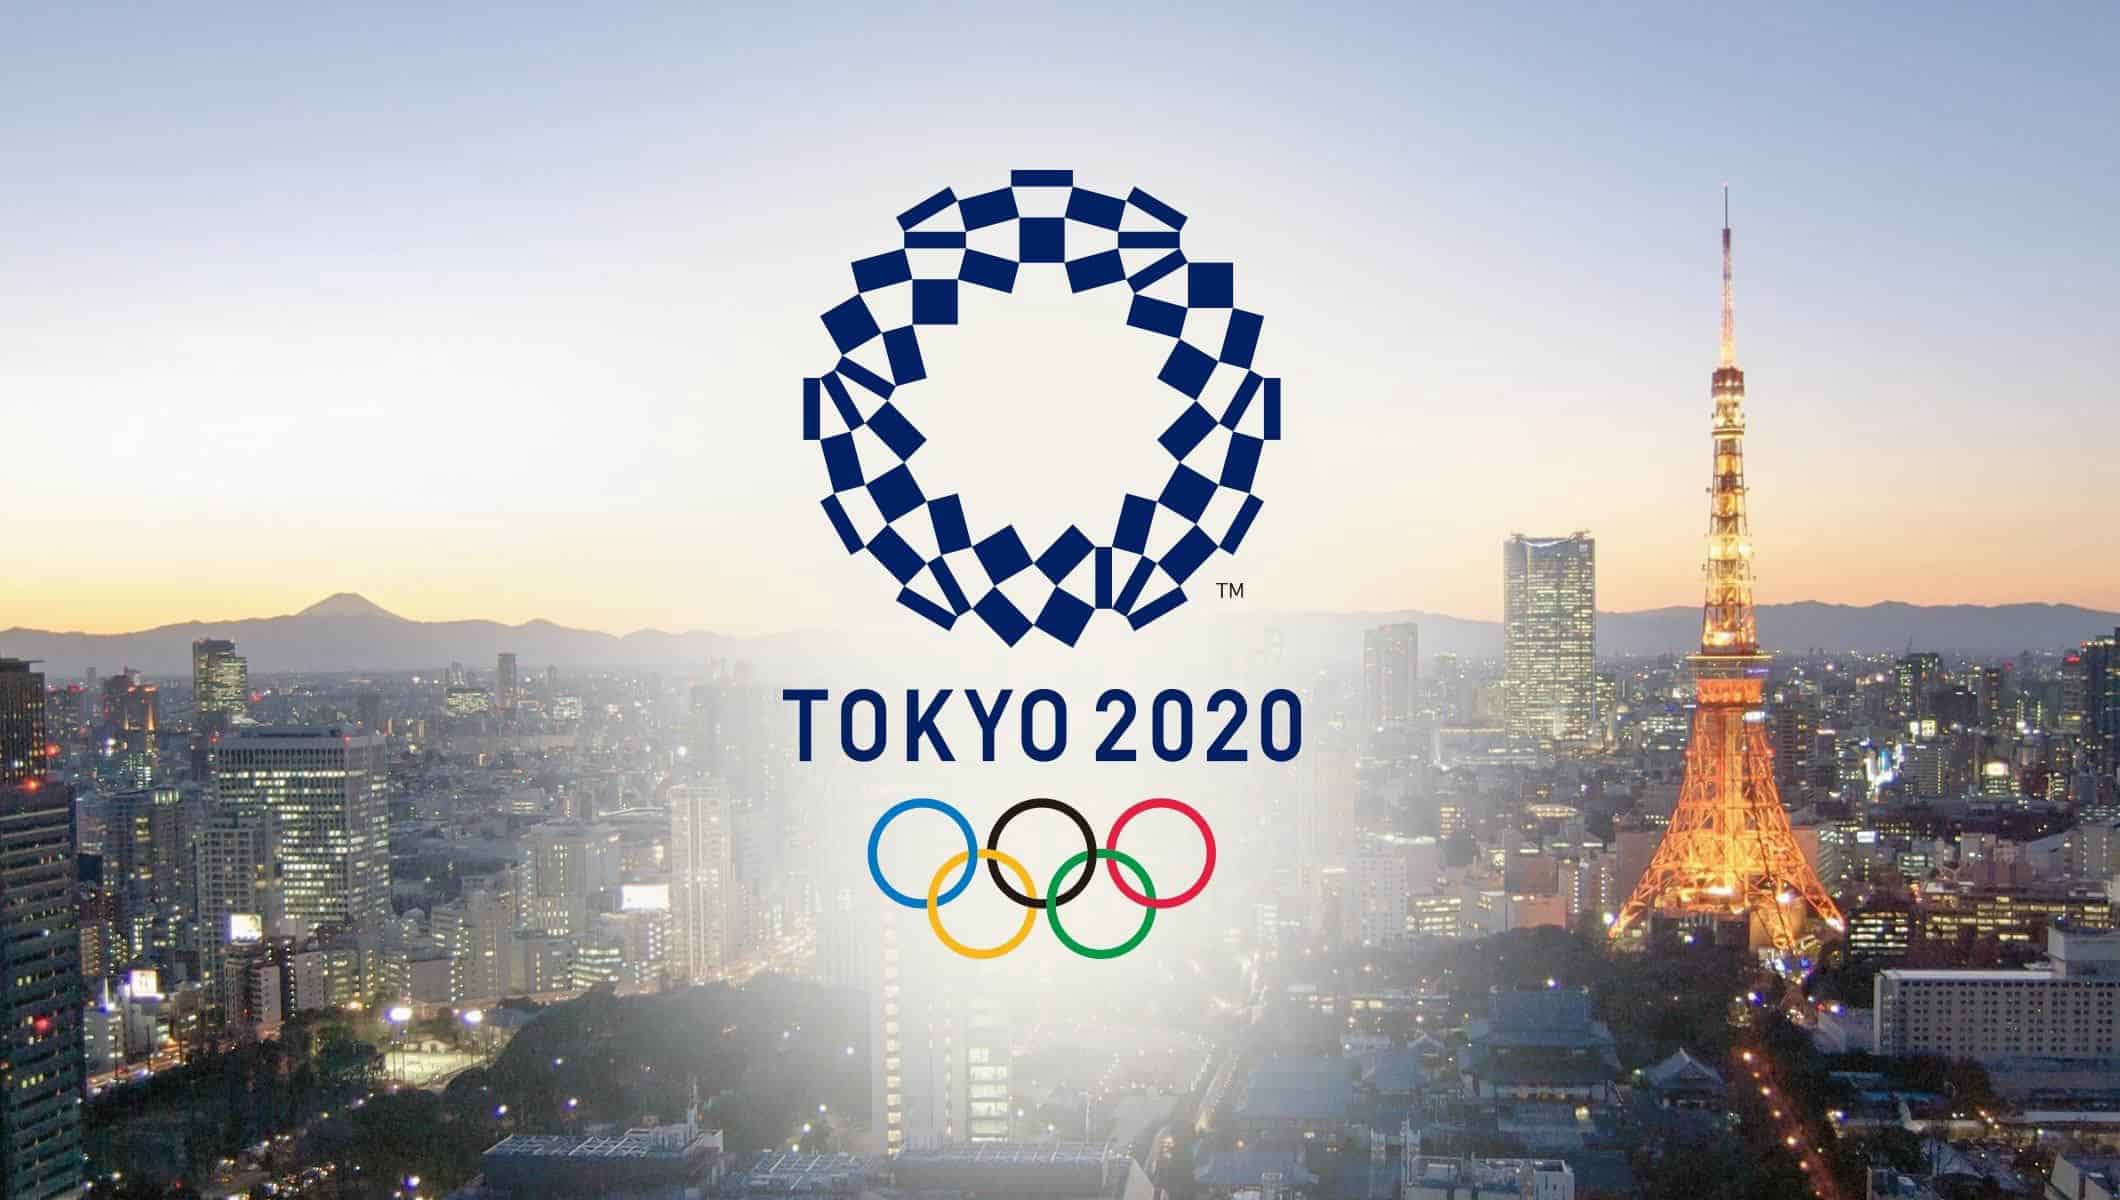 Tokyo 2020 Olympics that were postponed due to COVID-19, like many other sports.